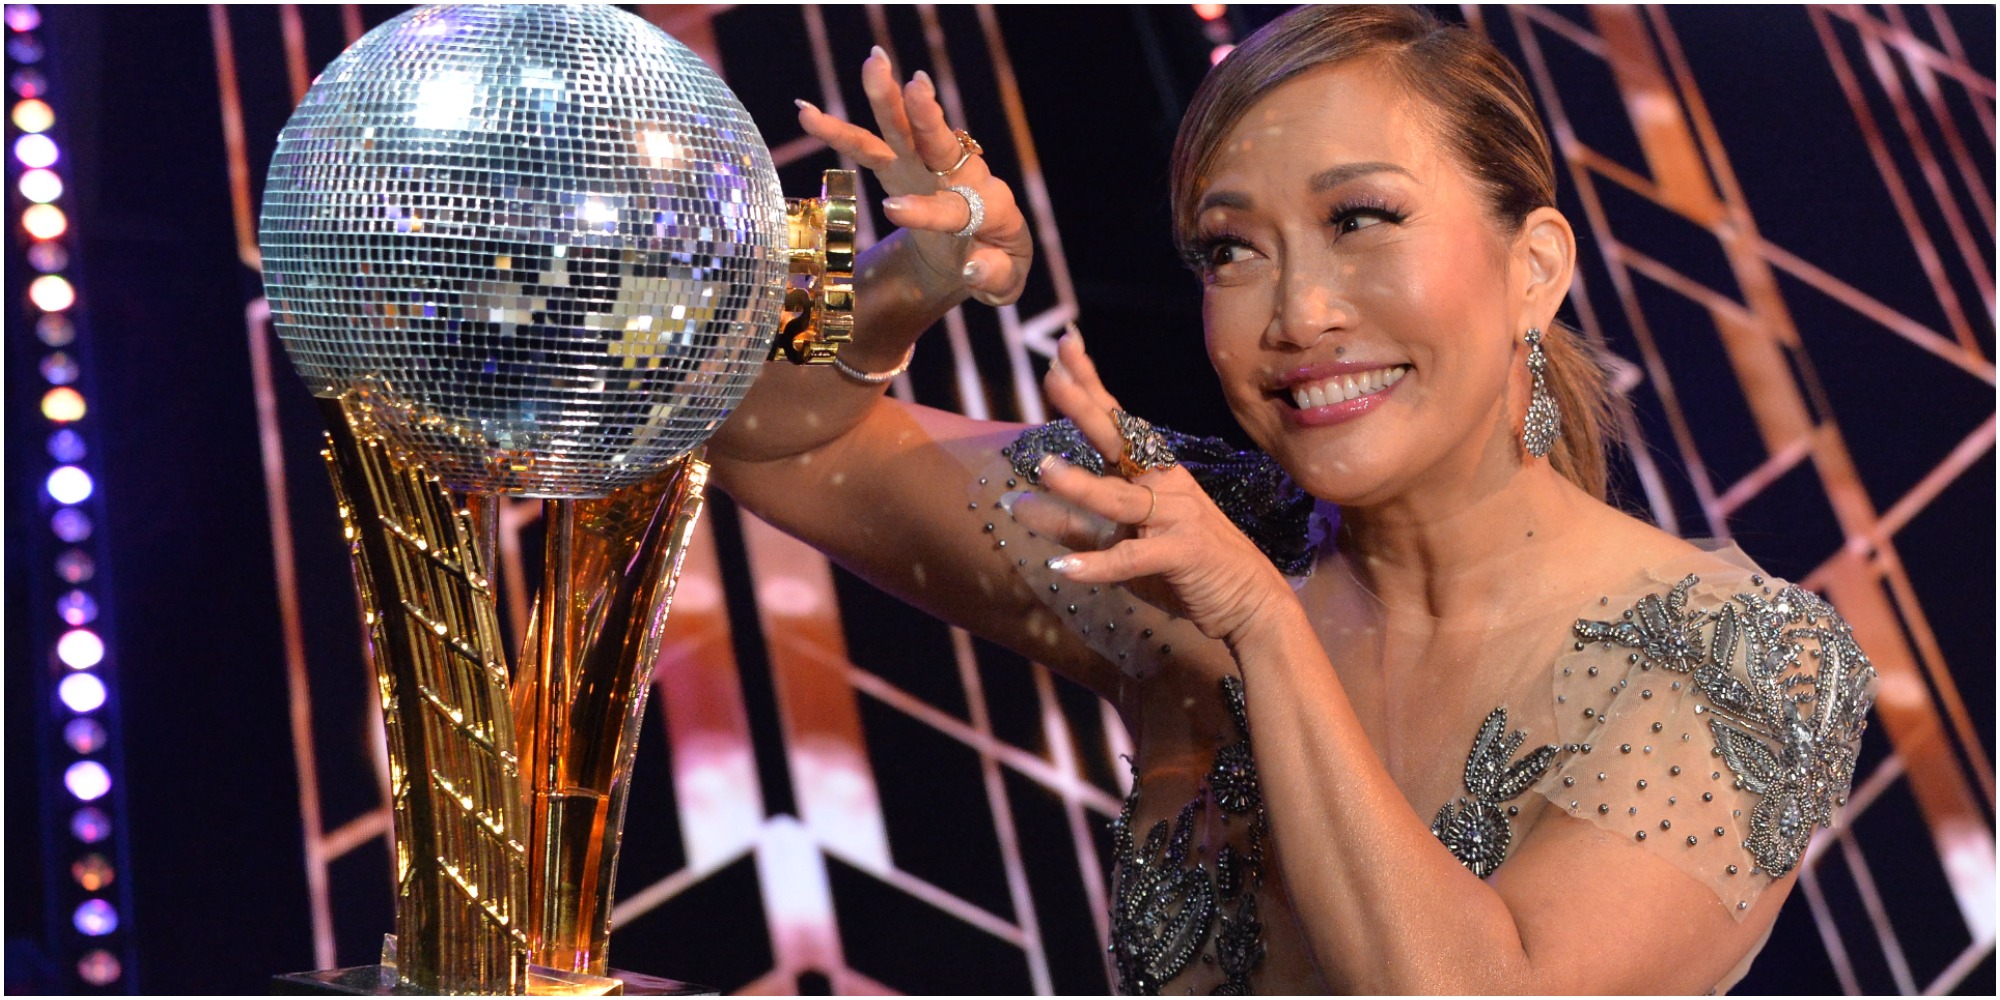 Carrie Ann Inaba looking at a mirrorball on the set of Dancing with the Stars season 30.